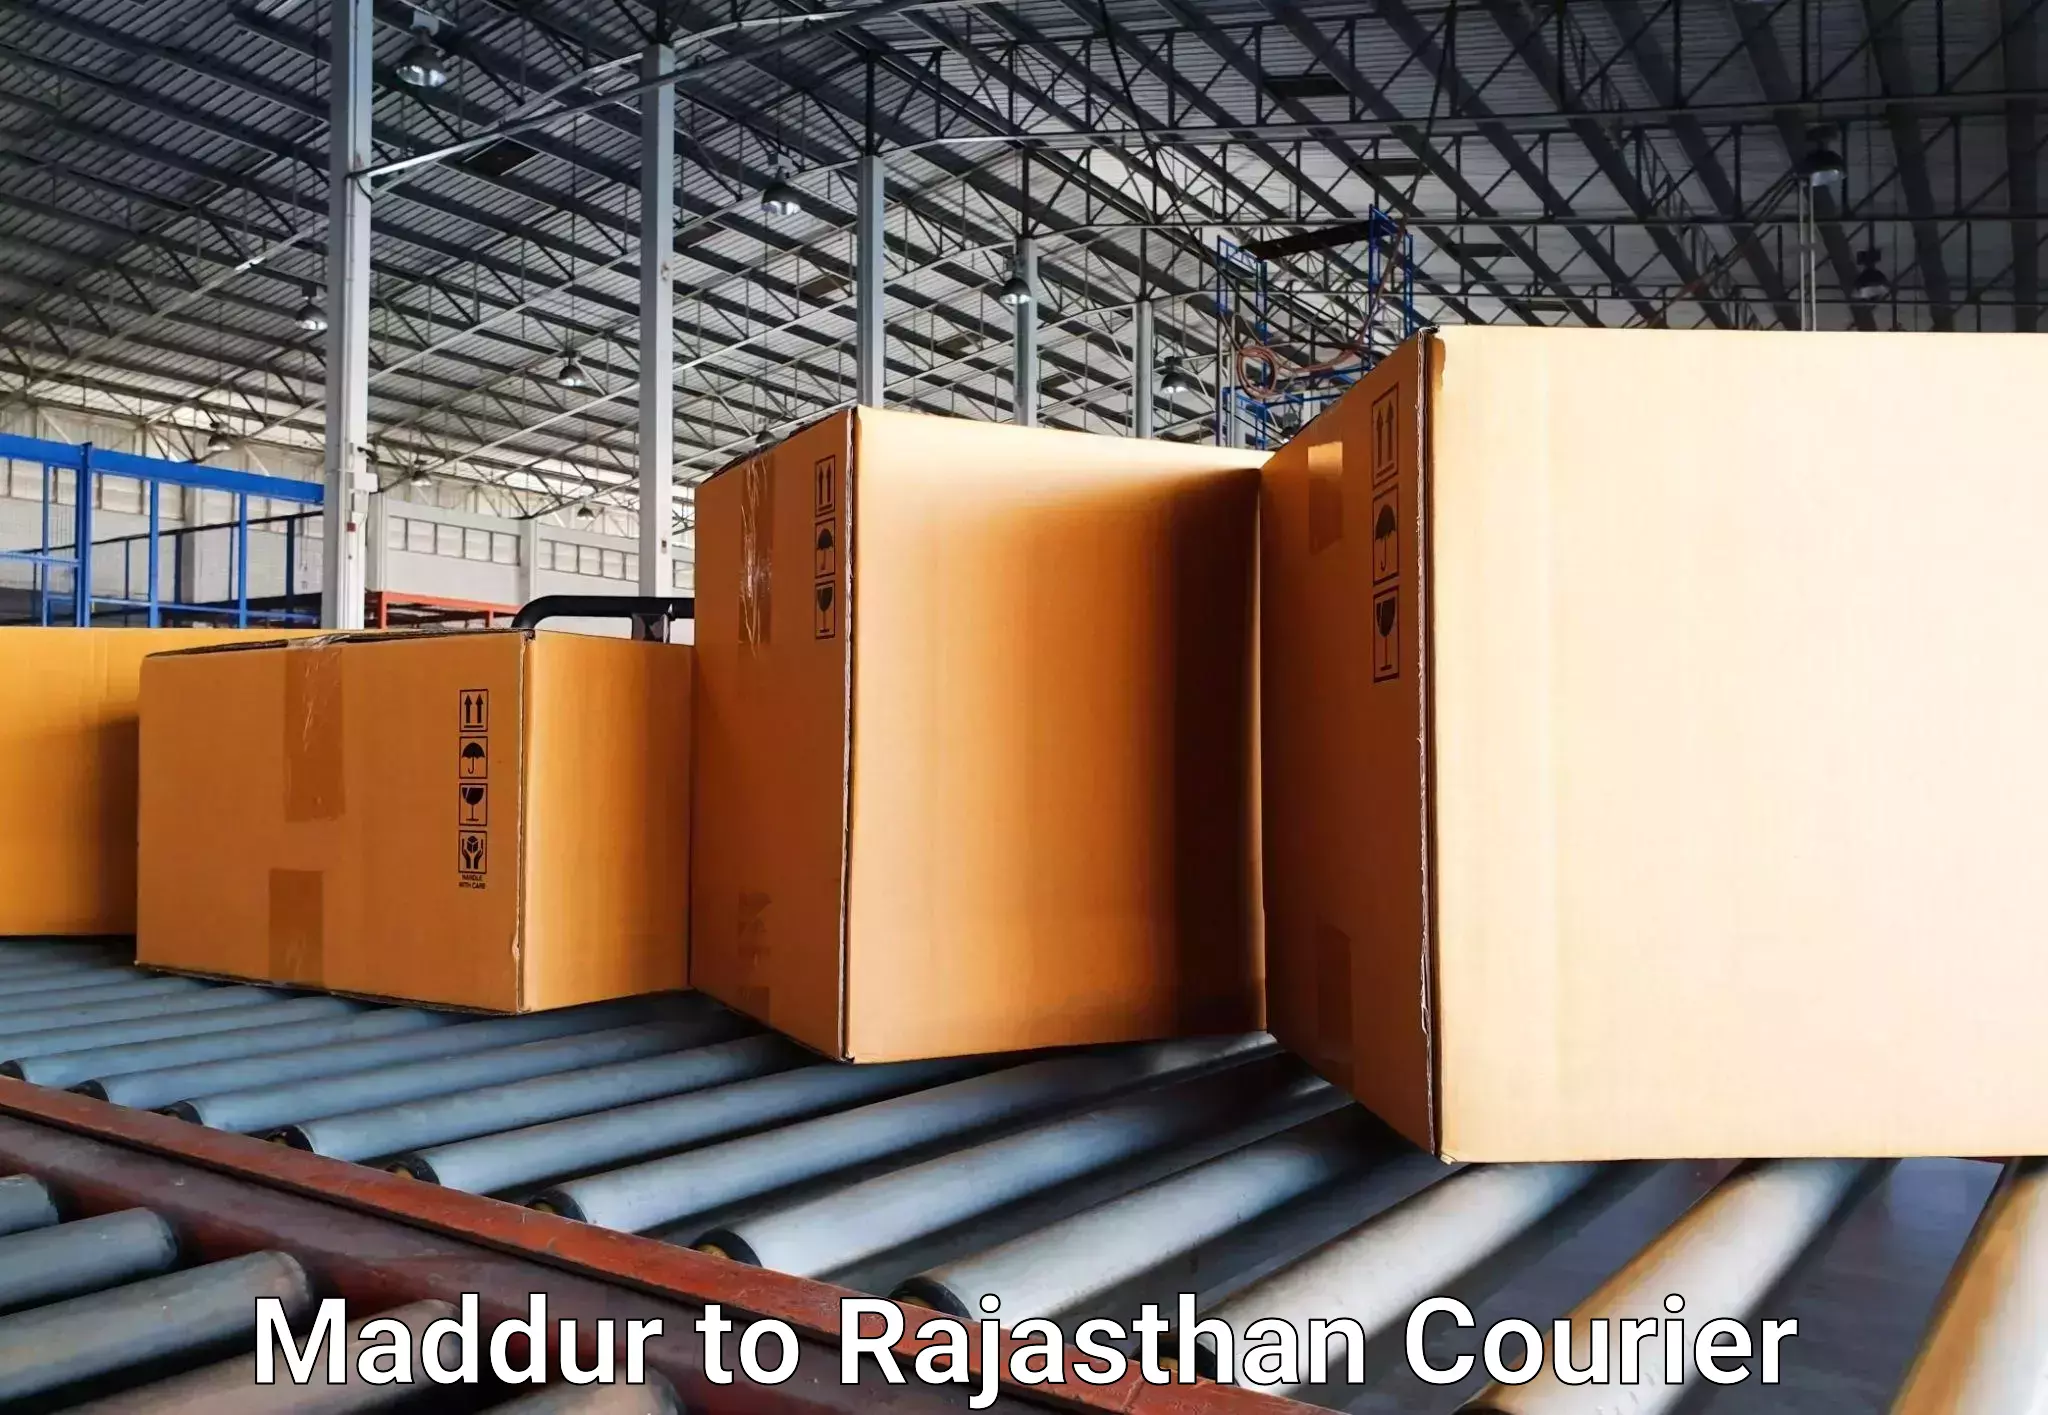 Luggage delivery network Maddur to Rajasthan